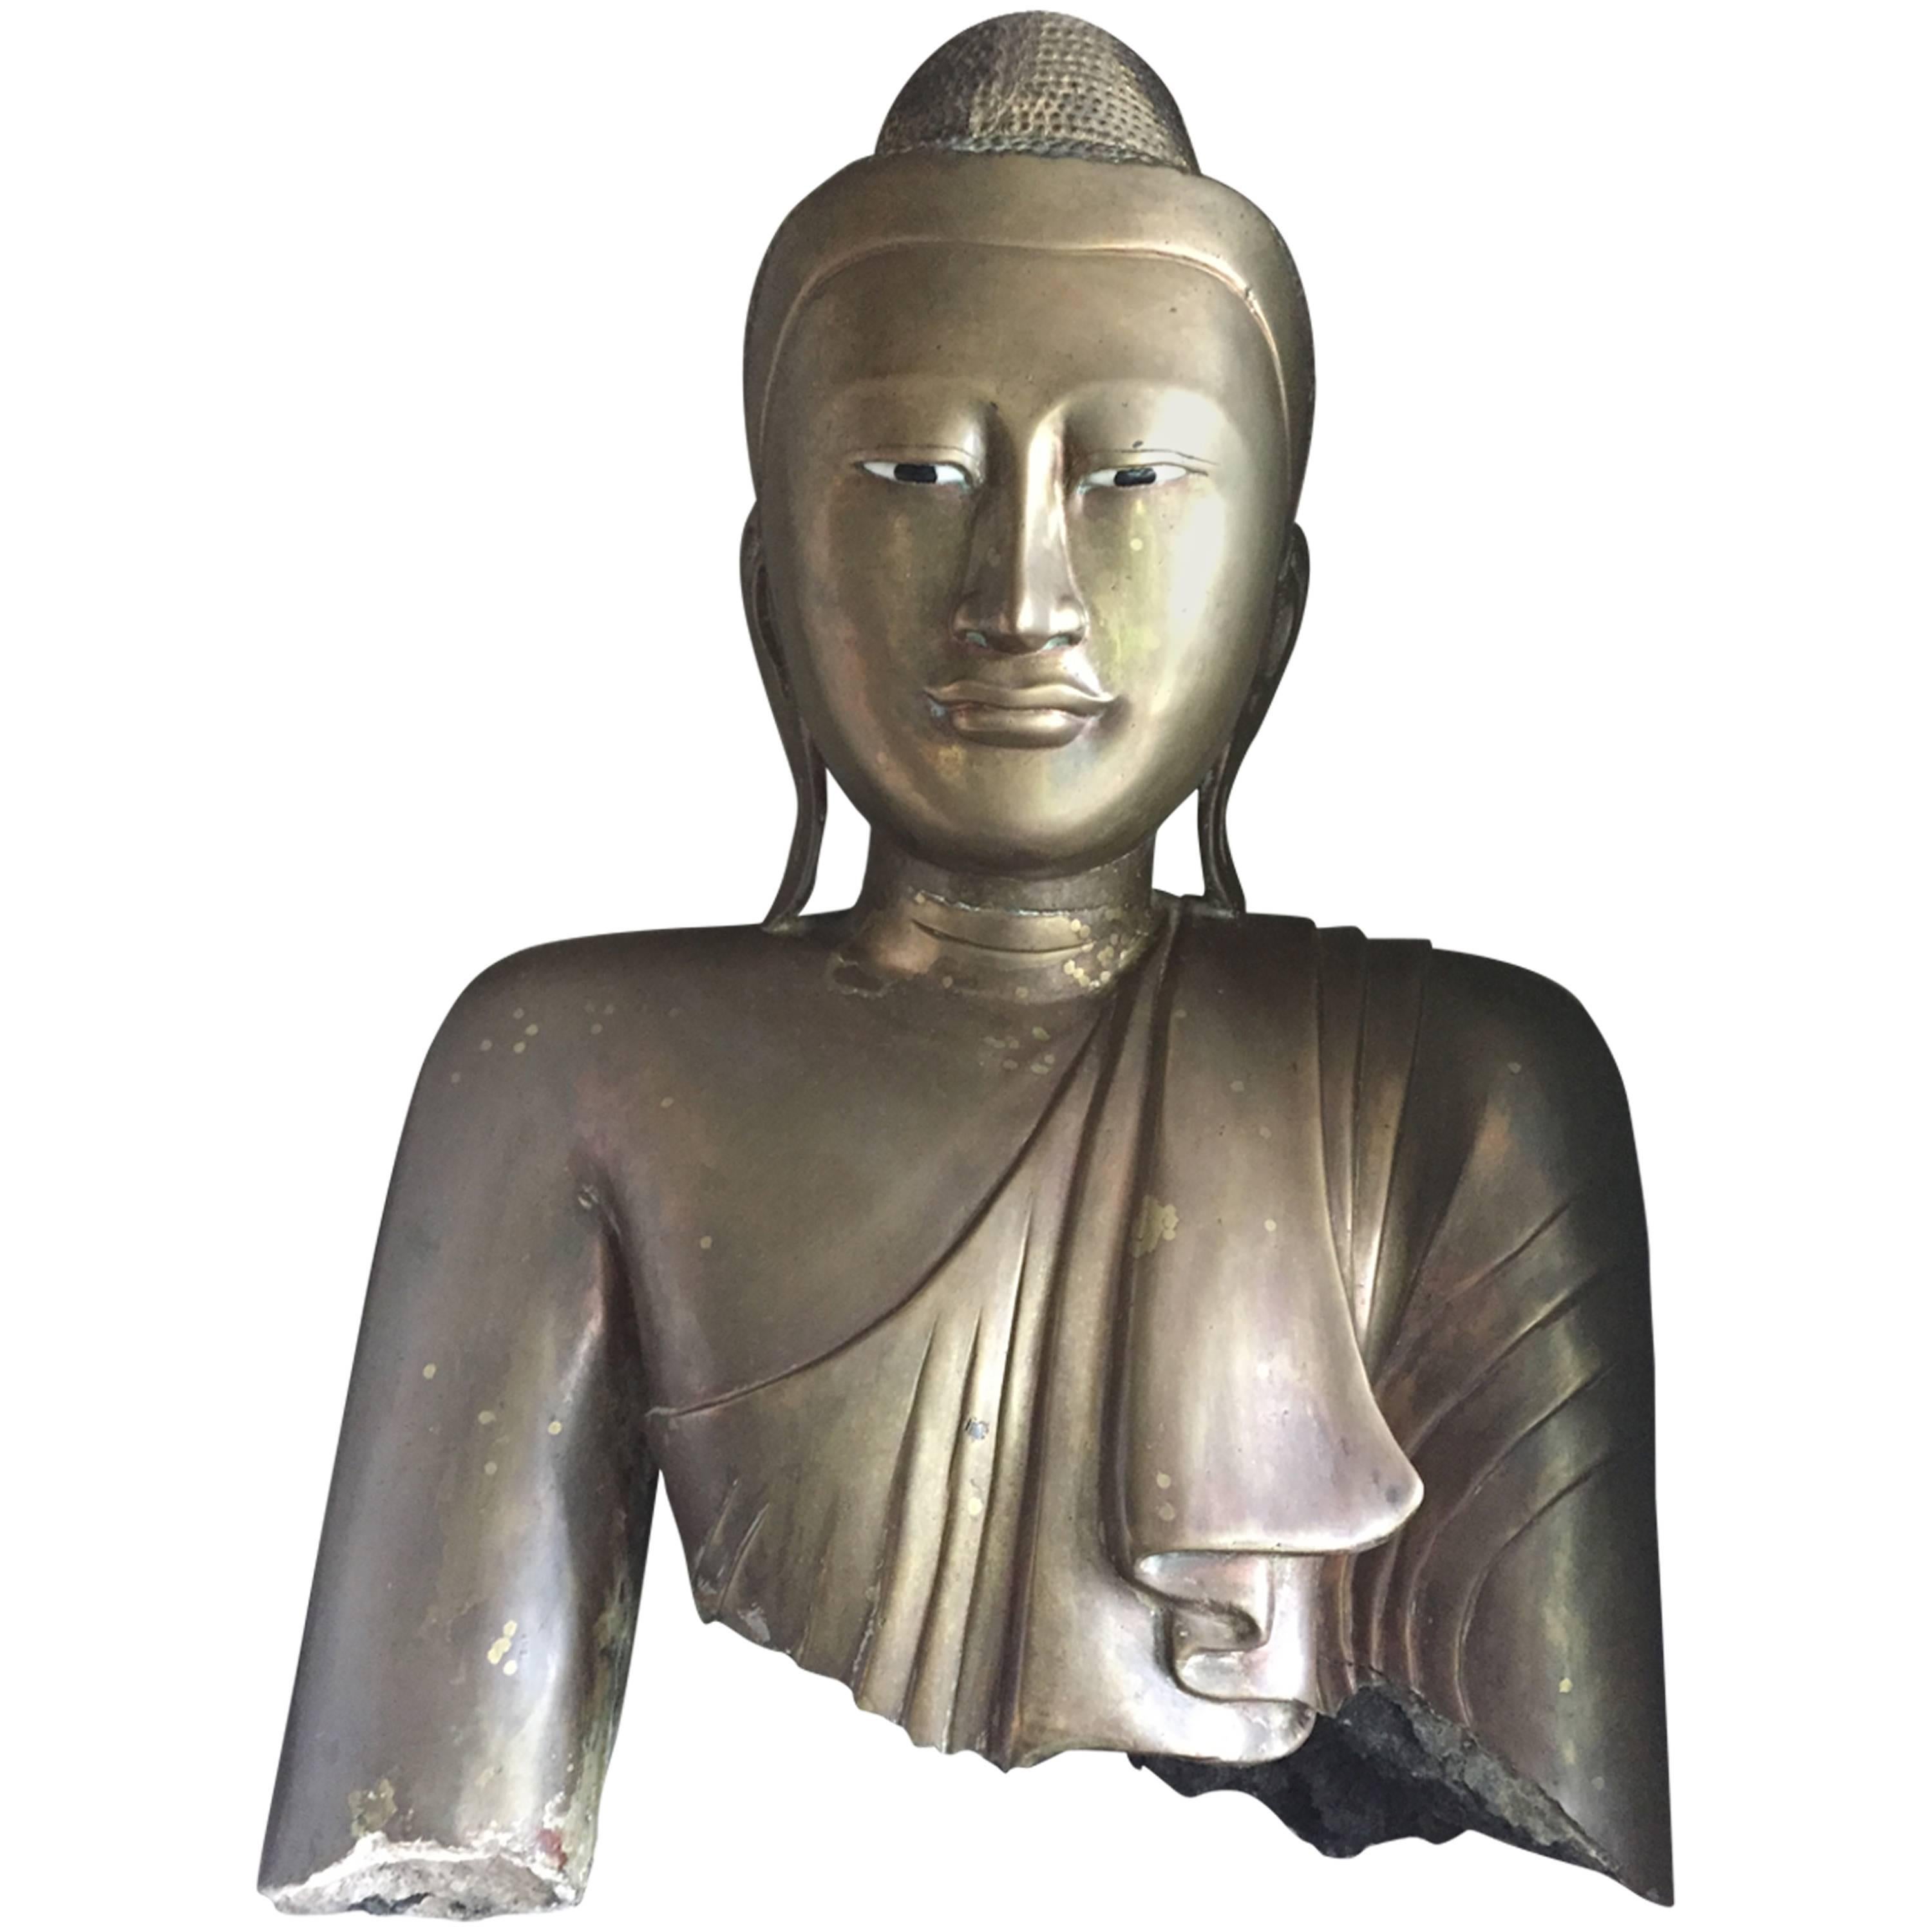 Elegant Antique Buddha Head, Guilded Bronze, 19th century, Burma,
beautiful head and torso of Buddha, simple strong lines and  peaceful expression of the face,
great antique patina of the bronze with traces of the paint, warm finish of the